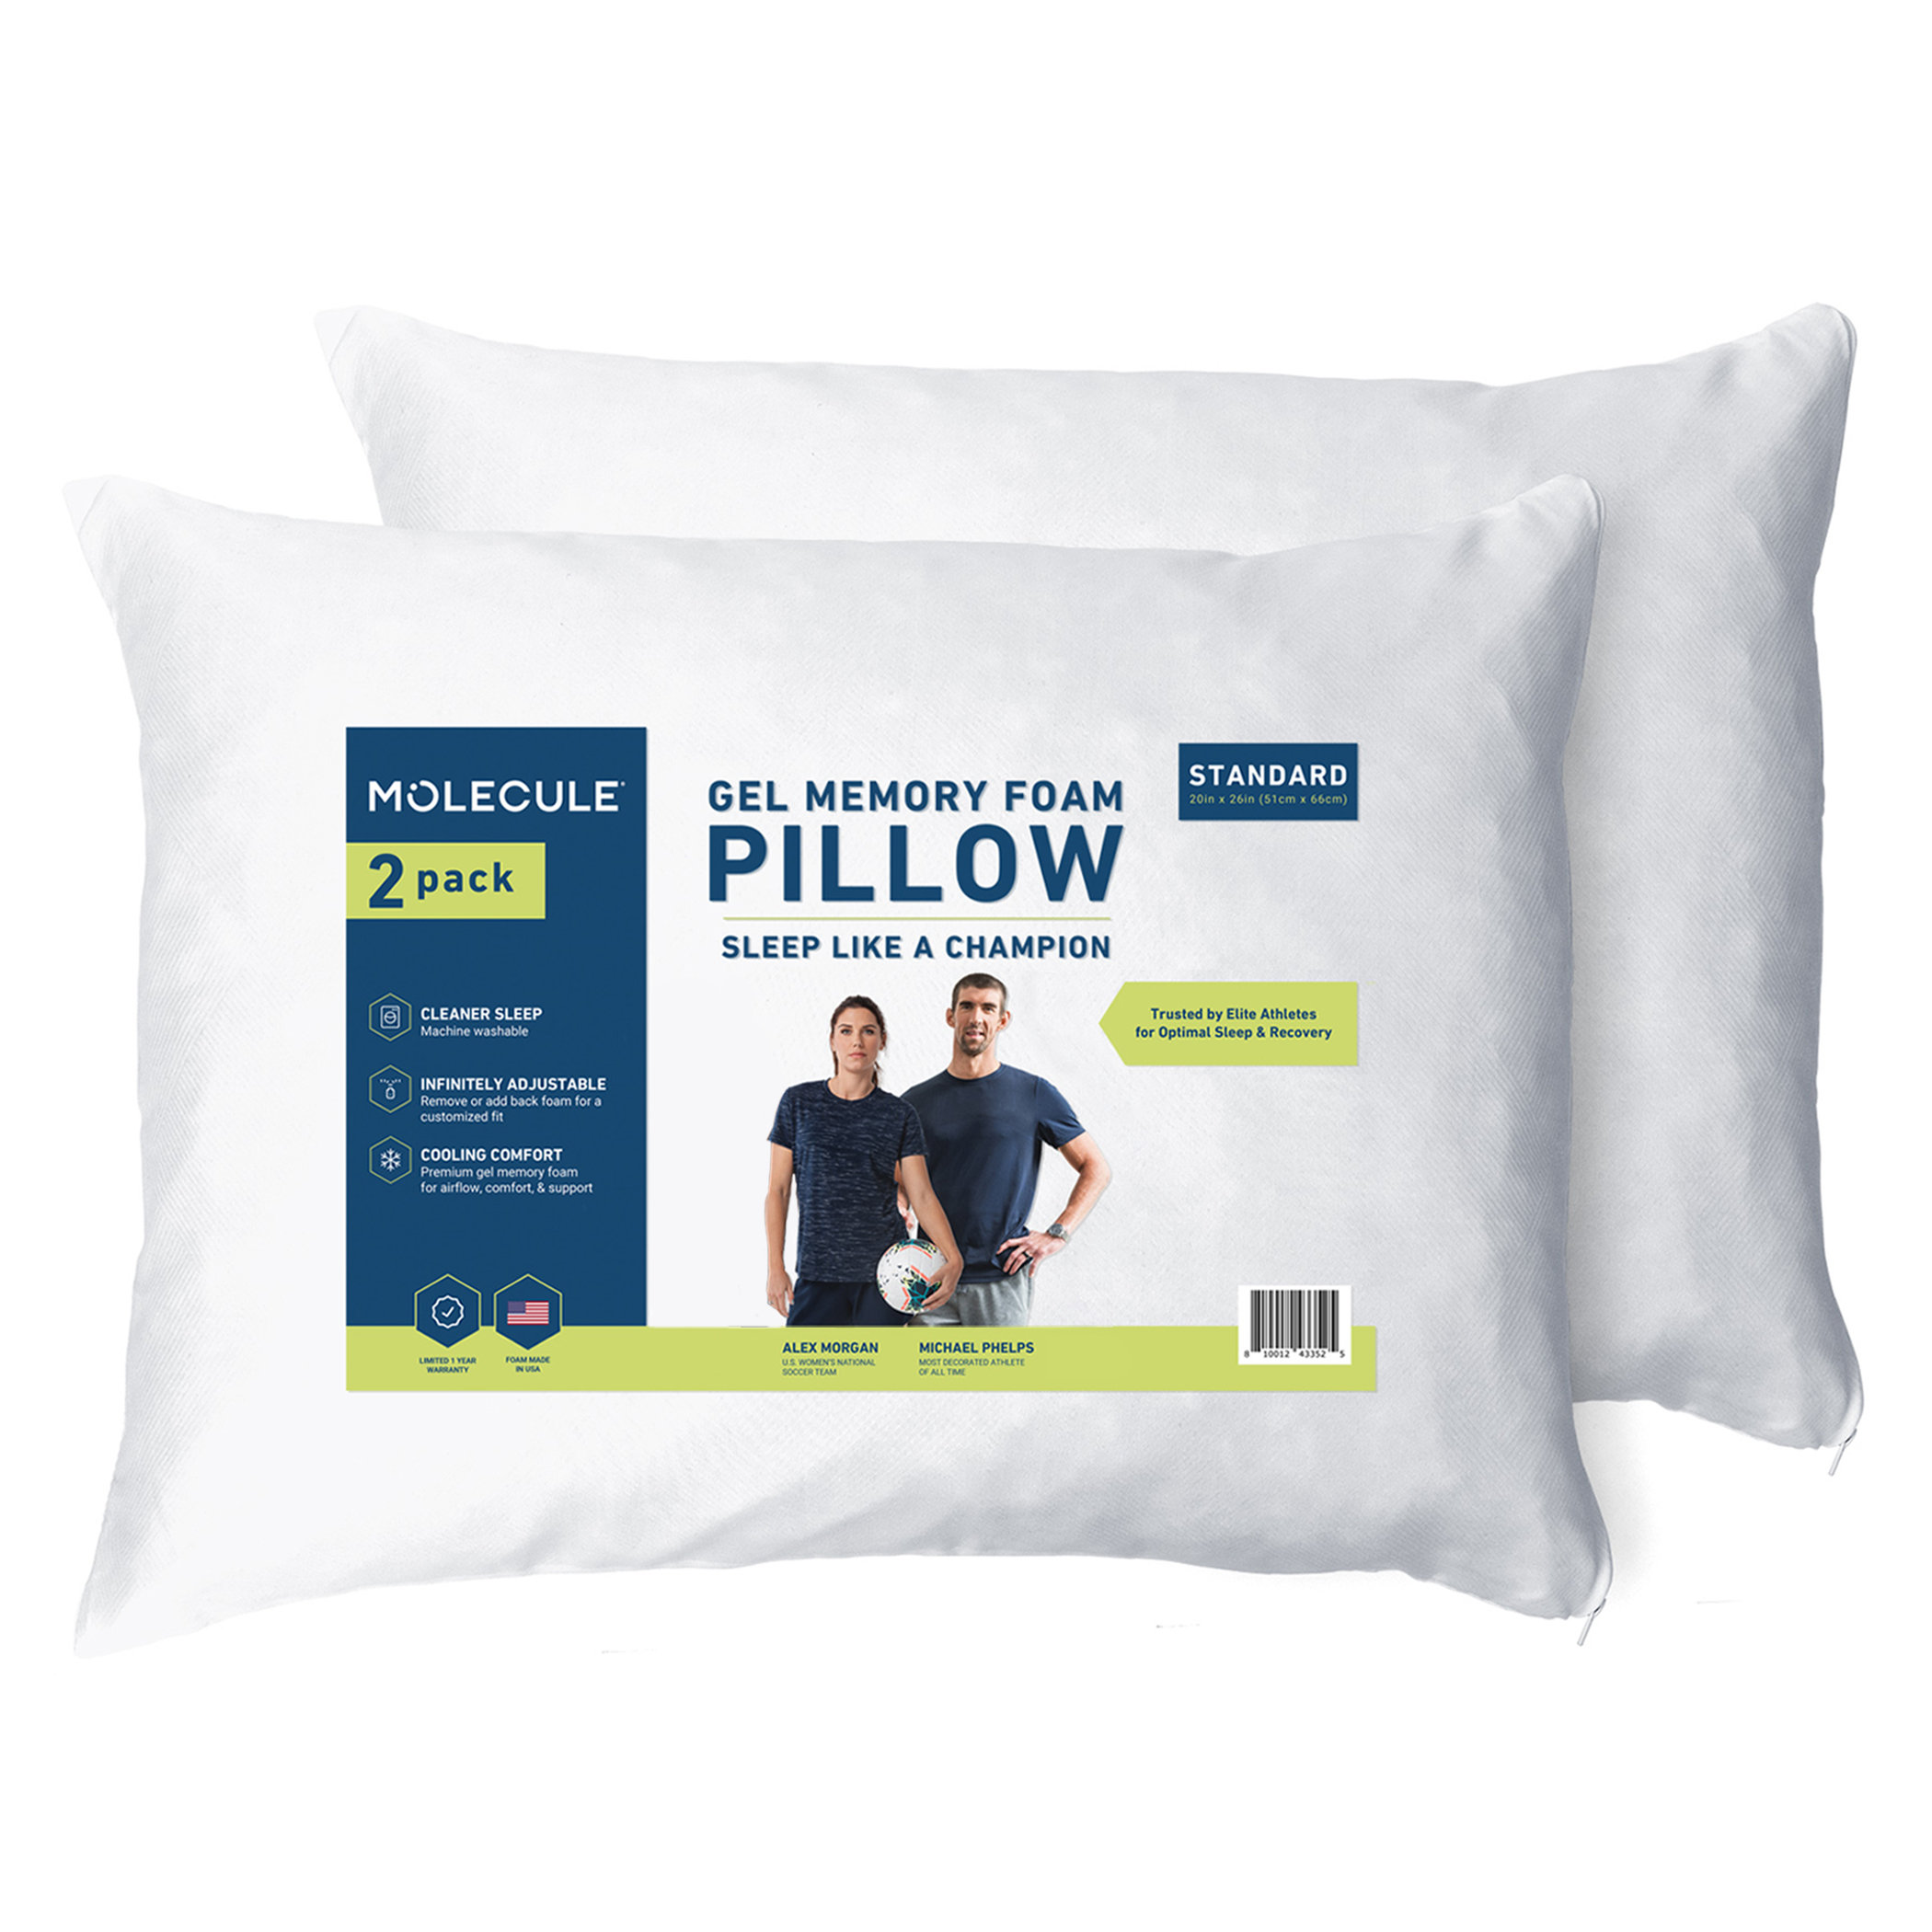 Beckham Hotel Collection Bed Pillows Standard / Queen Size Set of 2 - Down  Alternative Bedding Gel Cooling Pillow for Back, Stomach or Side Sleepers